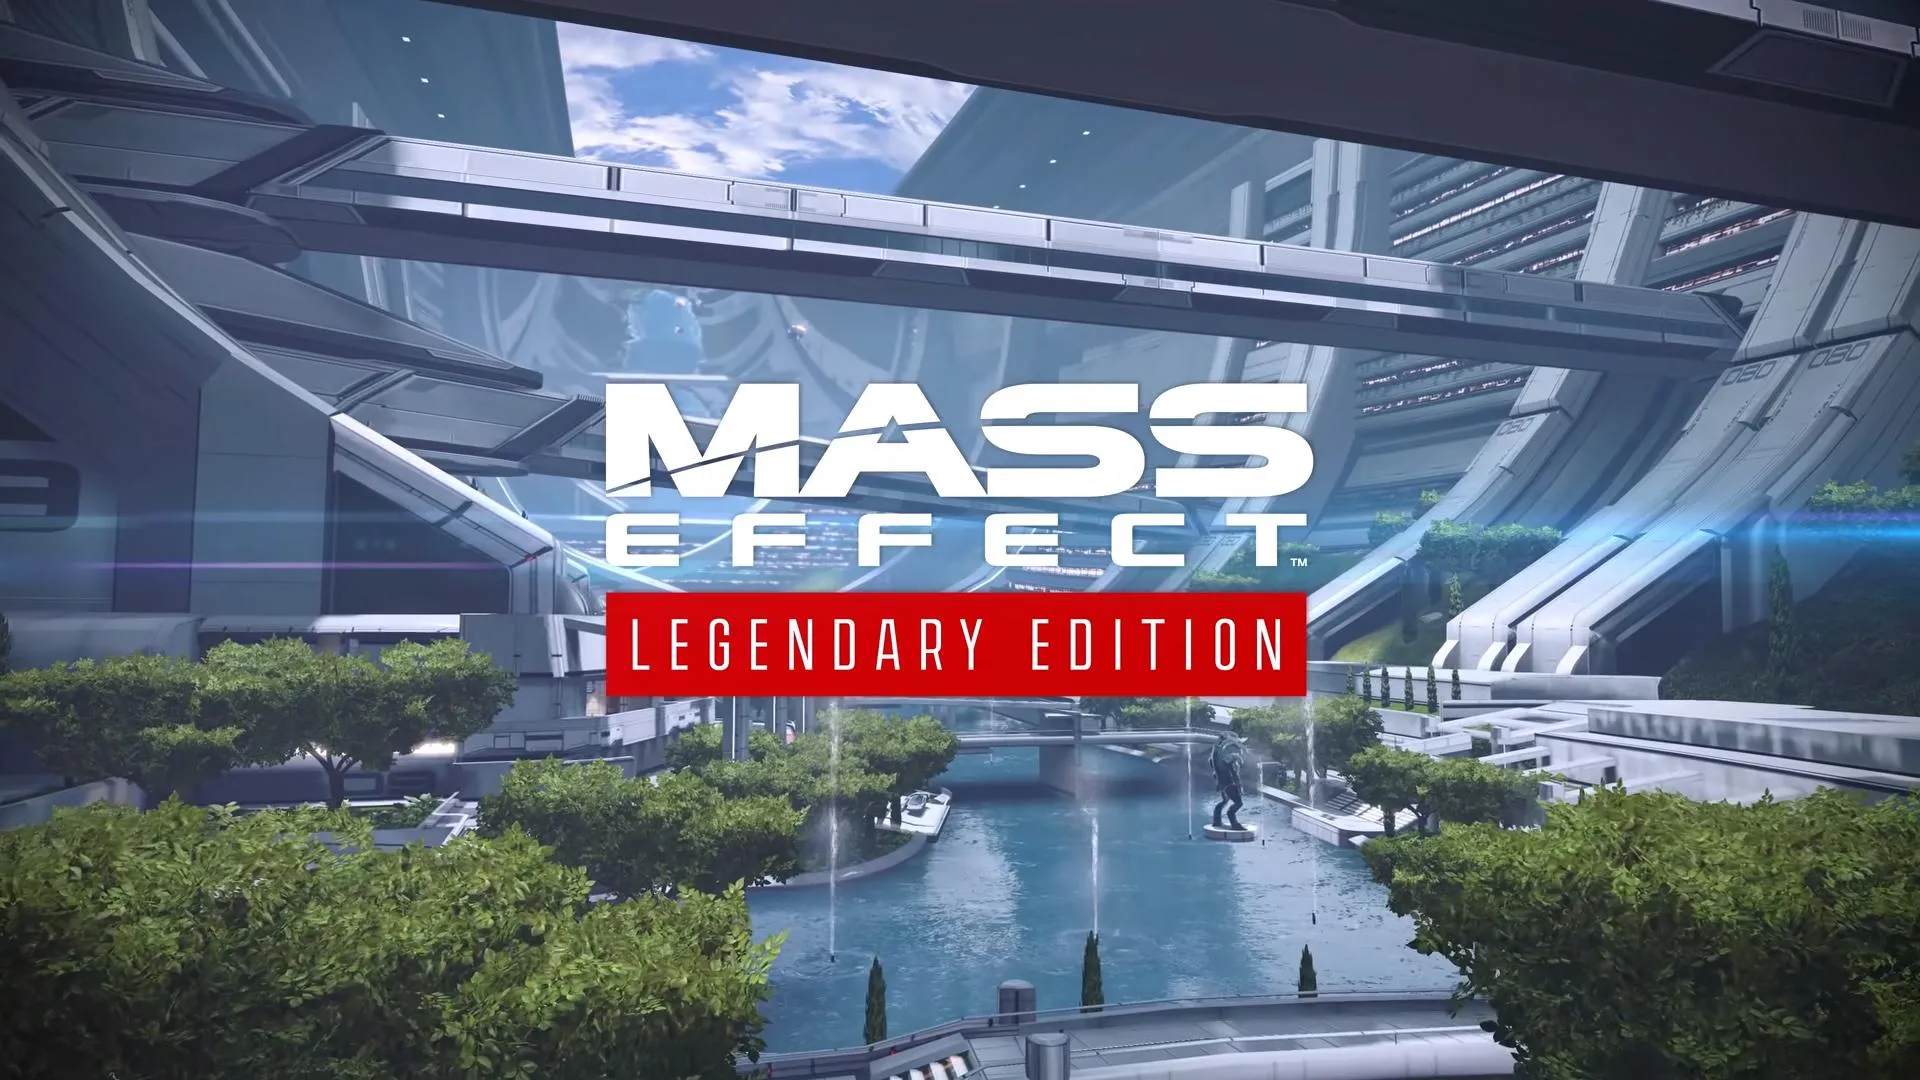 Are the Complaints About Mass Effect Legendary Edition Fair?